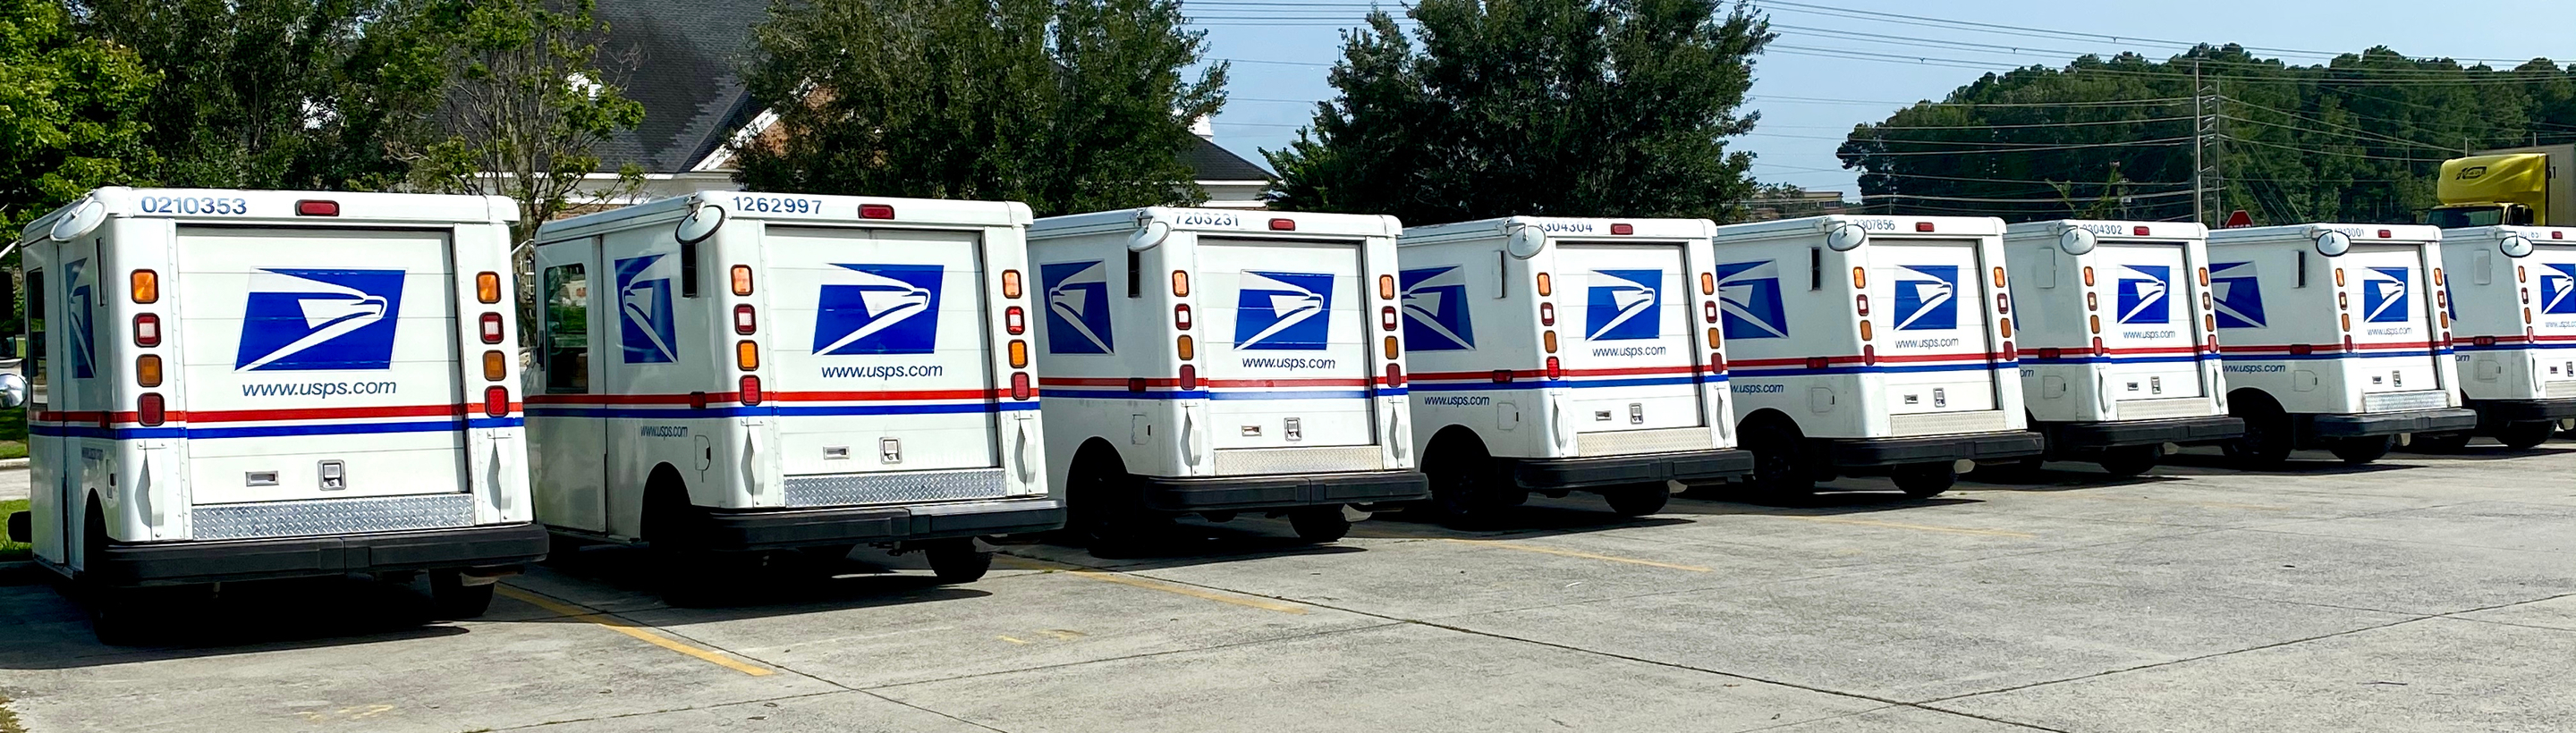 USPS First Class® vs. USPS Priority Mail® vs. USPS Retail Ground®